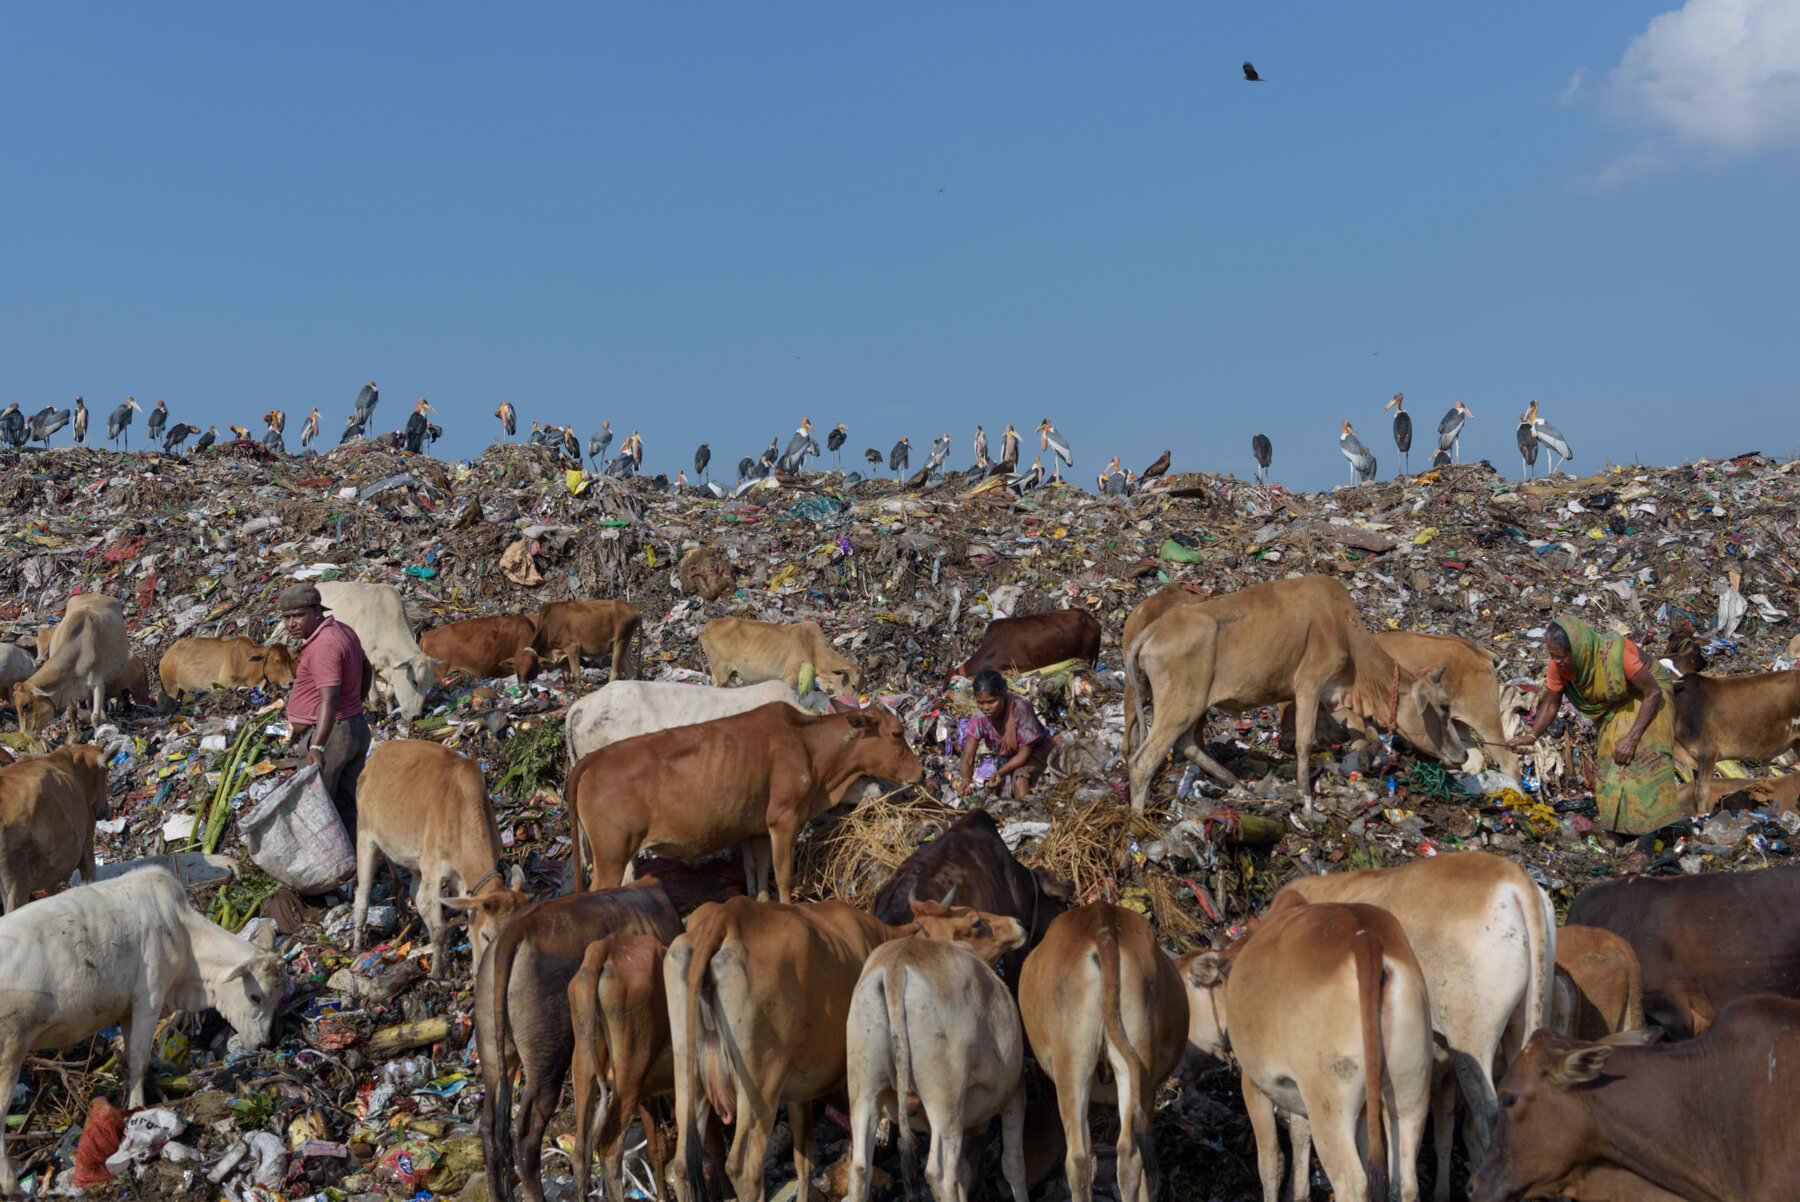  The Boragaon landfill - the largest trash dump in India spreading across 94 acres is home to the Greater Adjutant Stork. The birds are scavengers and therefore dumping sites are an important feeding ground for them. 